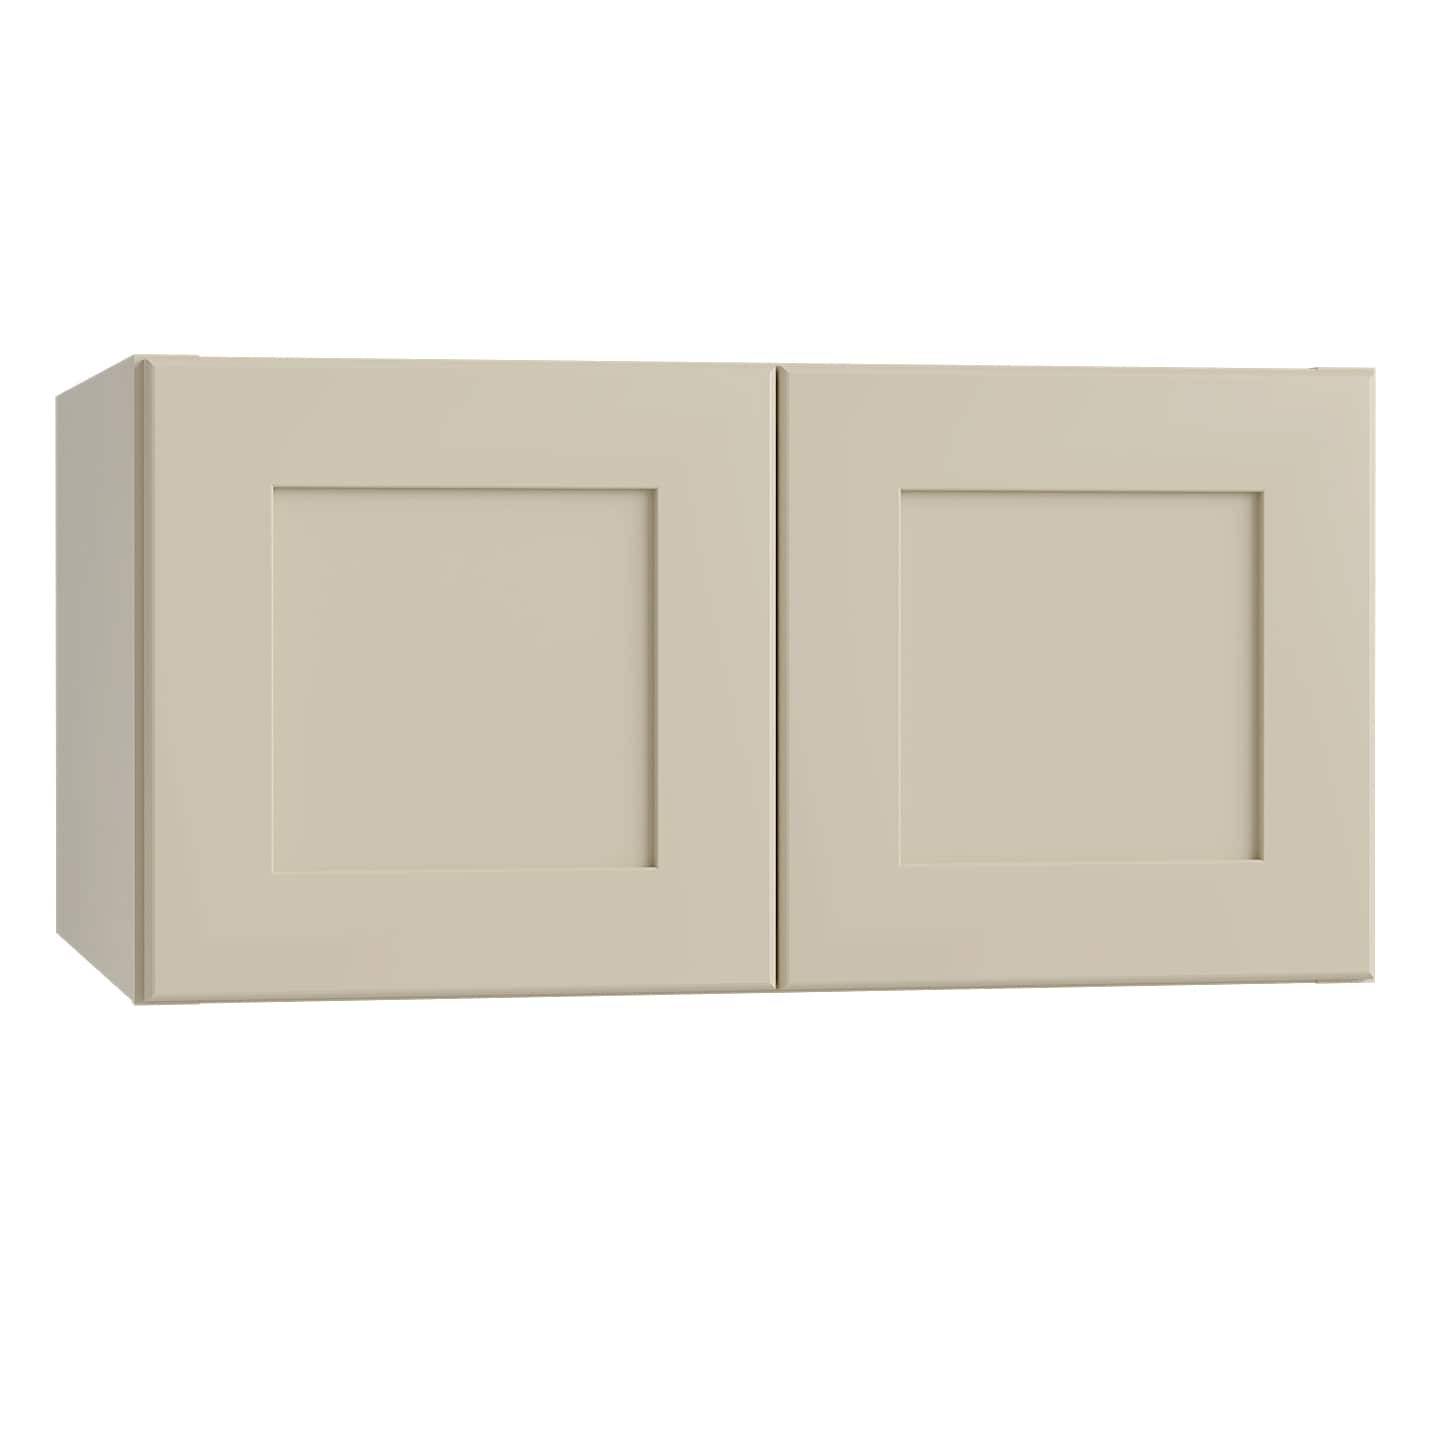 Luxxe Cabinetry 30-in W x 15-in H x 24-in D Norfolk Blended Cream Painted Door Wall Fully Assembled Semi-custom Cabinet in Off-White | W302415-NBC